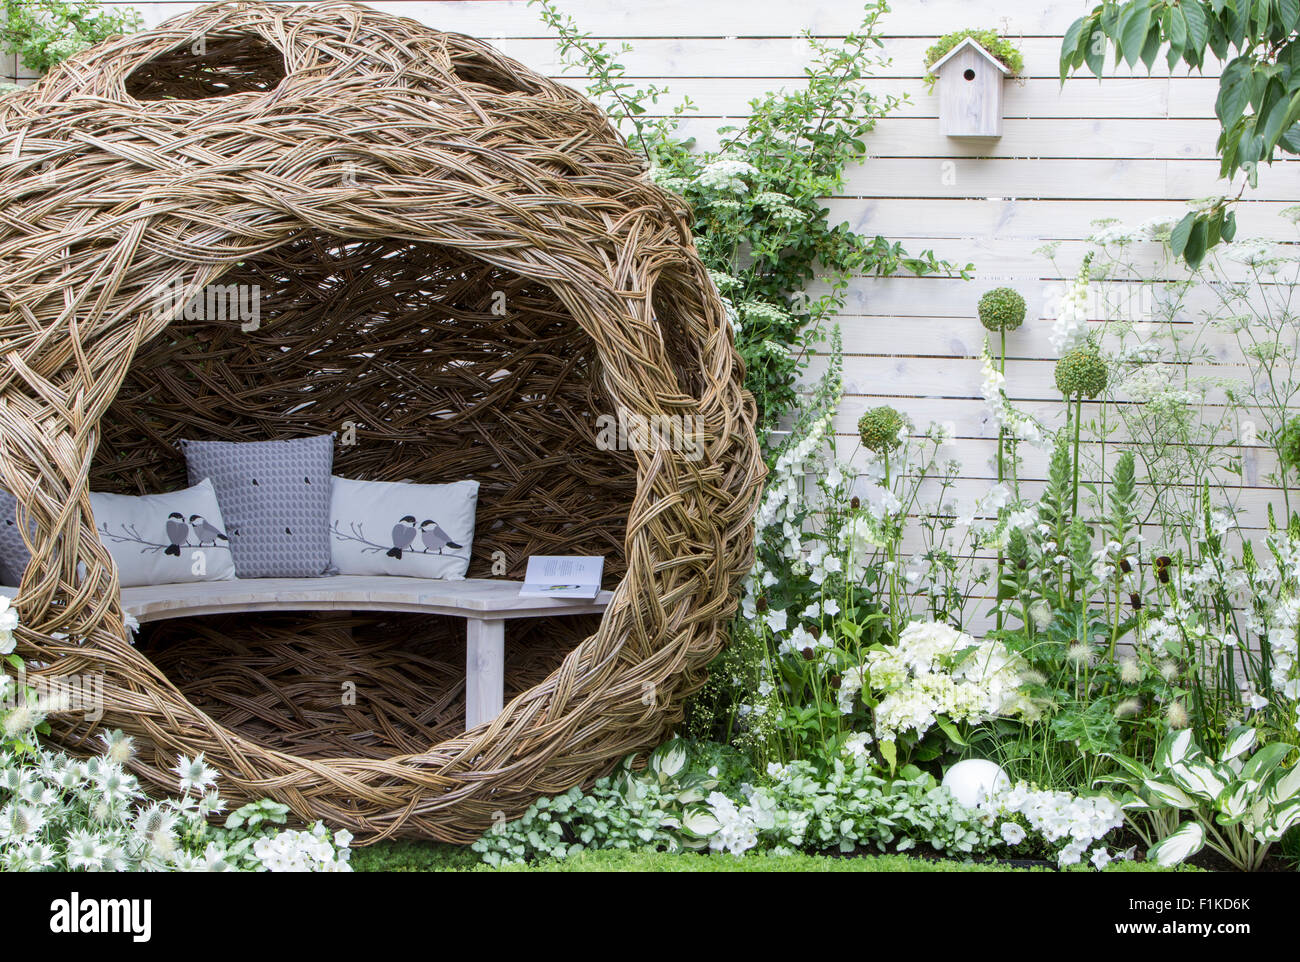 Garden with Modern patio woven willow structure bench bird cushions border planted with white flowering flowers plants painted white fence bird box UK Stock Photo